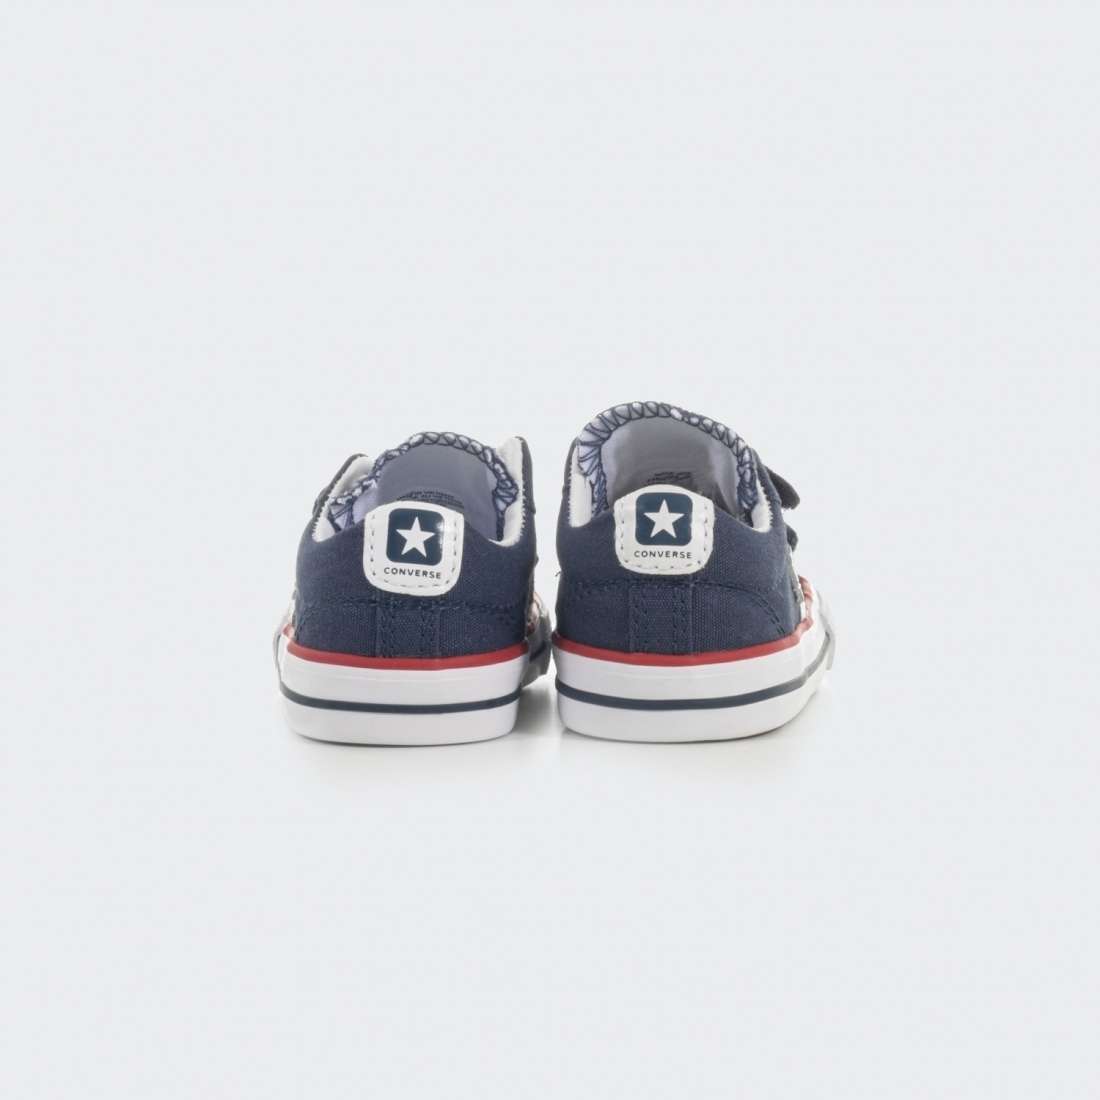 CONVERSE ALL STAR PLAYER NAVY/WHITE/RED